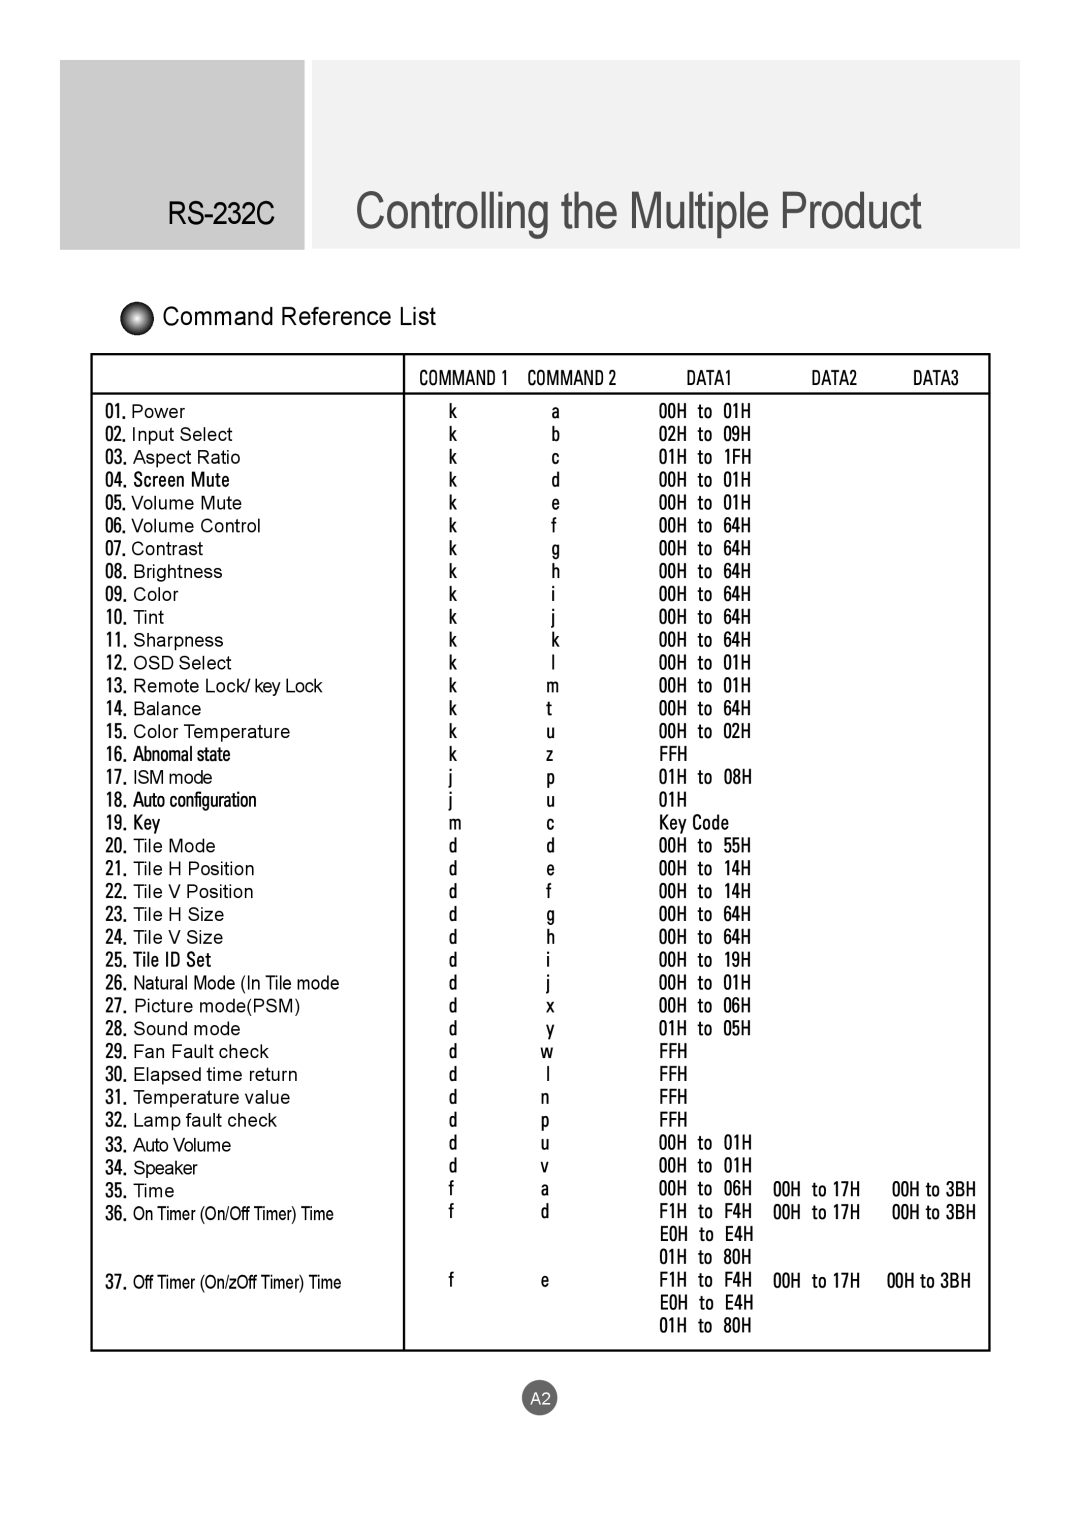 LG Electronics M4720C, M5520C owner manual Command Reference List, Controlling the Multiple Product, RS-232C 